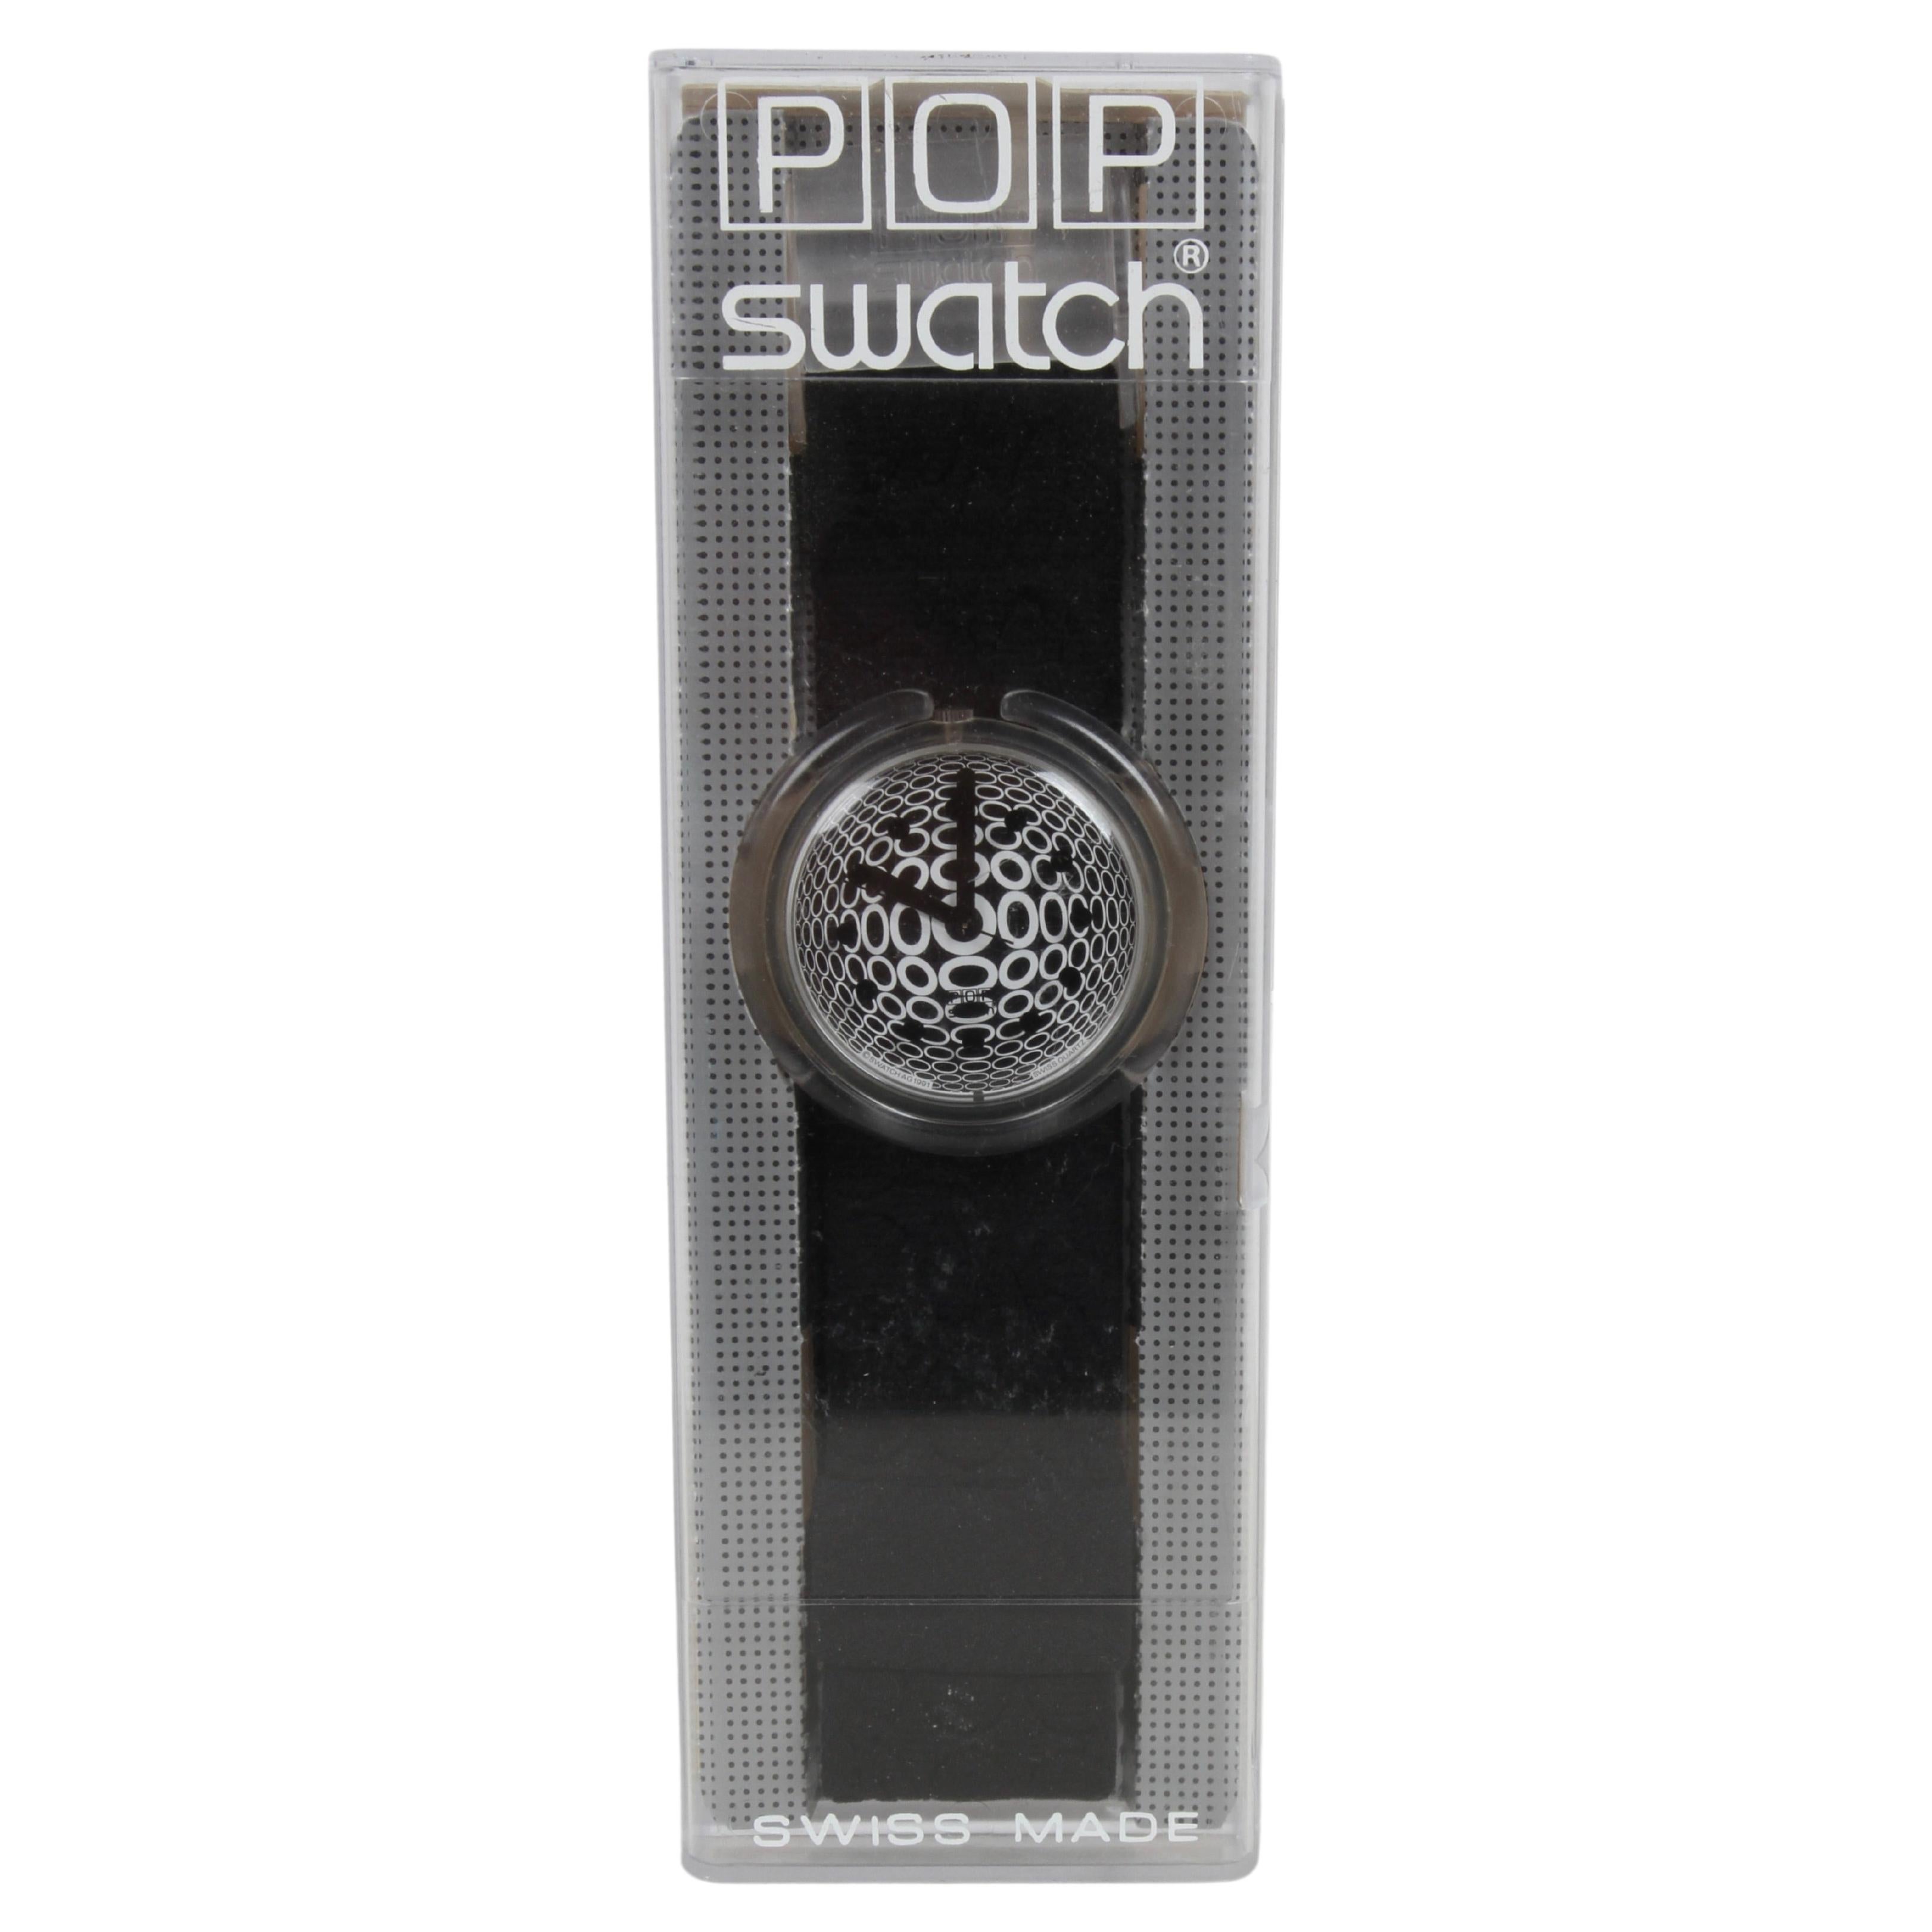 1992 Vintage POP Swatch Watch Special Dots - Op Art - Designed by Vasarely - NOS